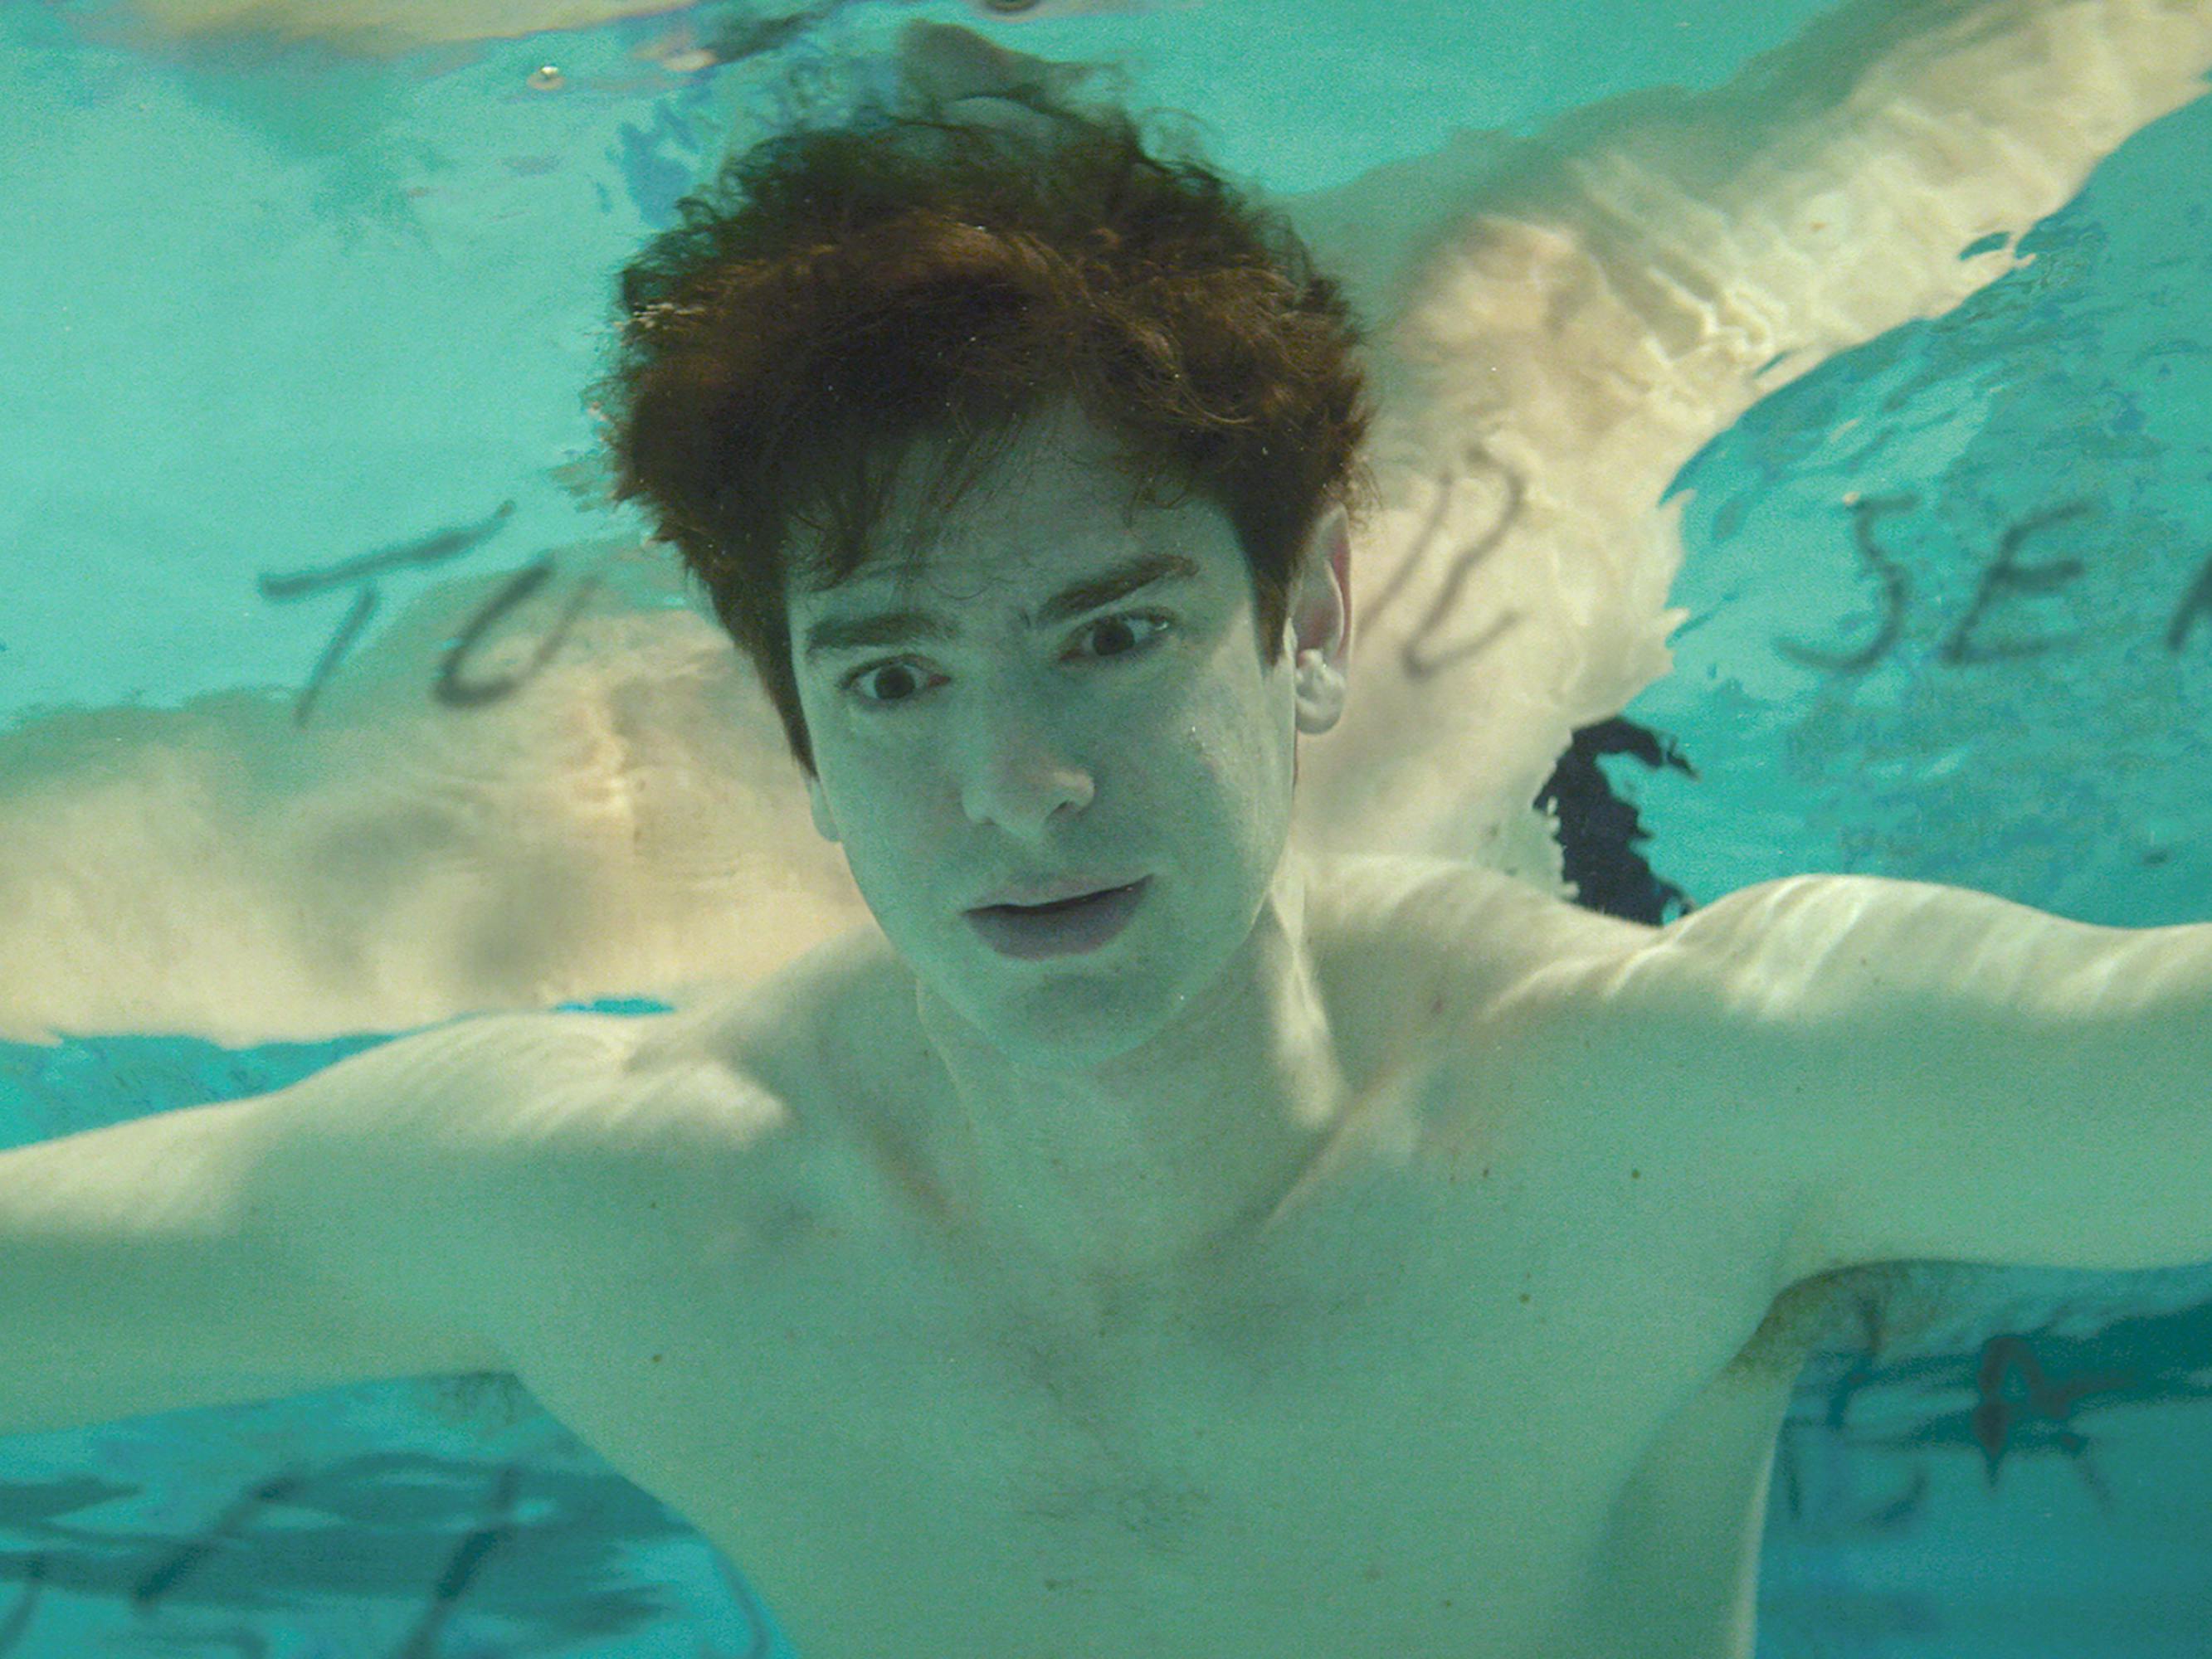 Andrew Garfield floats in a pool looking existential. Floating letters surround his face. He looks scary with his eyes open under water.